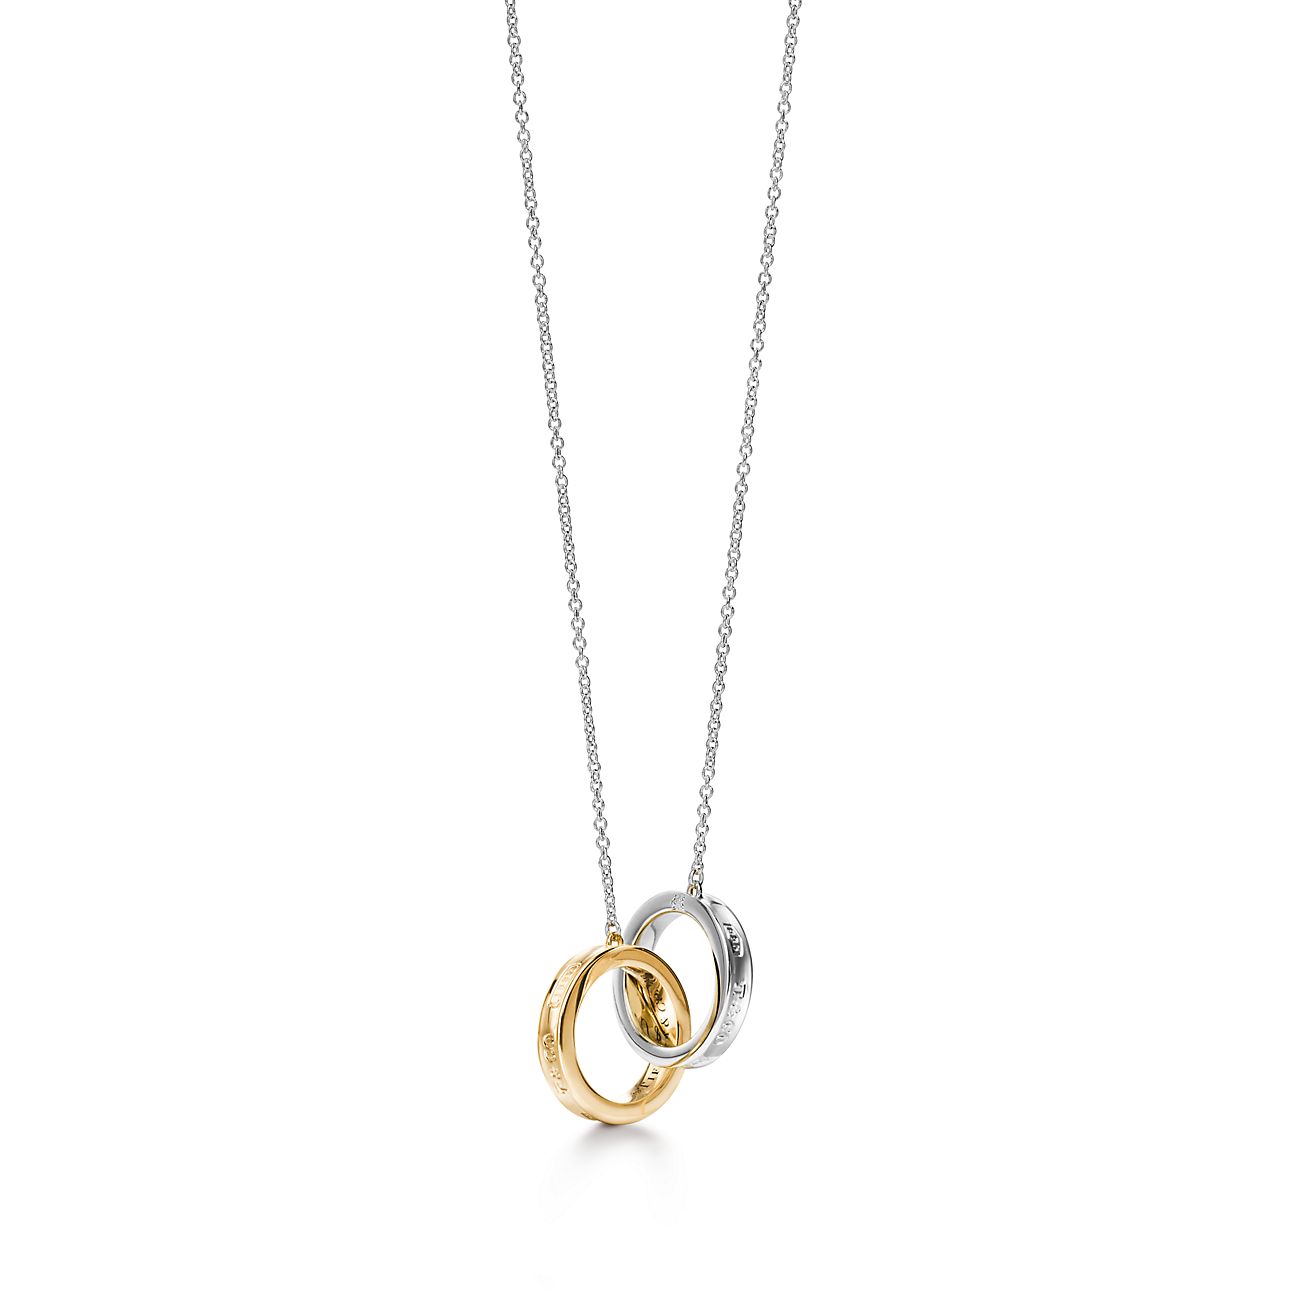 Buy Accessorize London Silver Linked Circles Pendant Necklace Online At  Best Price @ Tata CLiQ